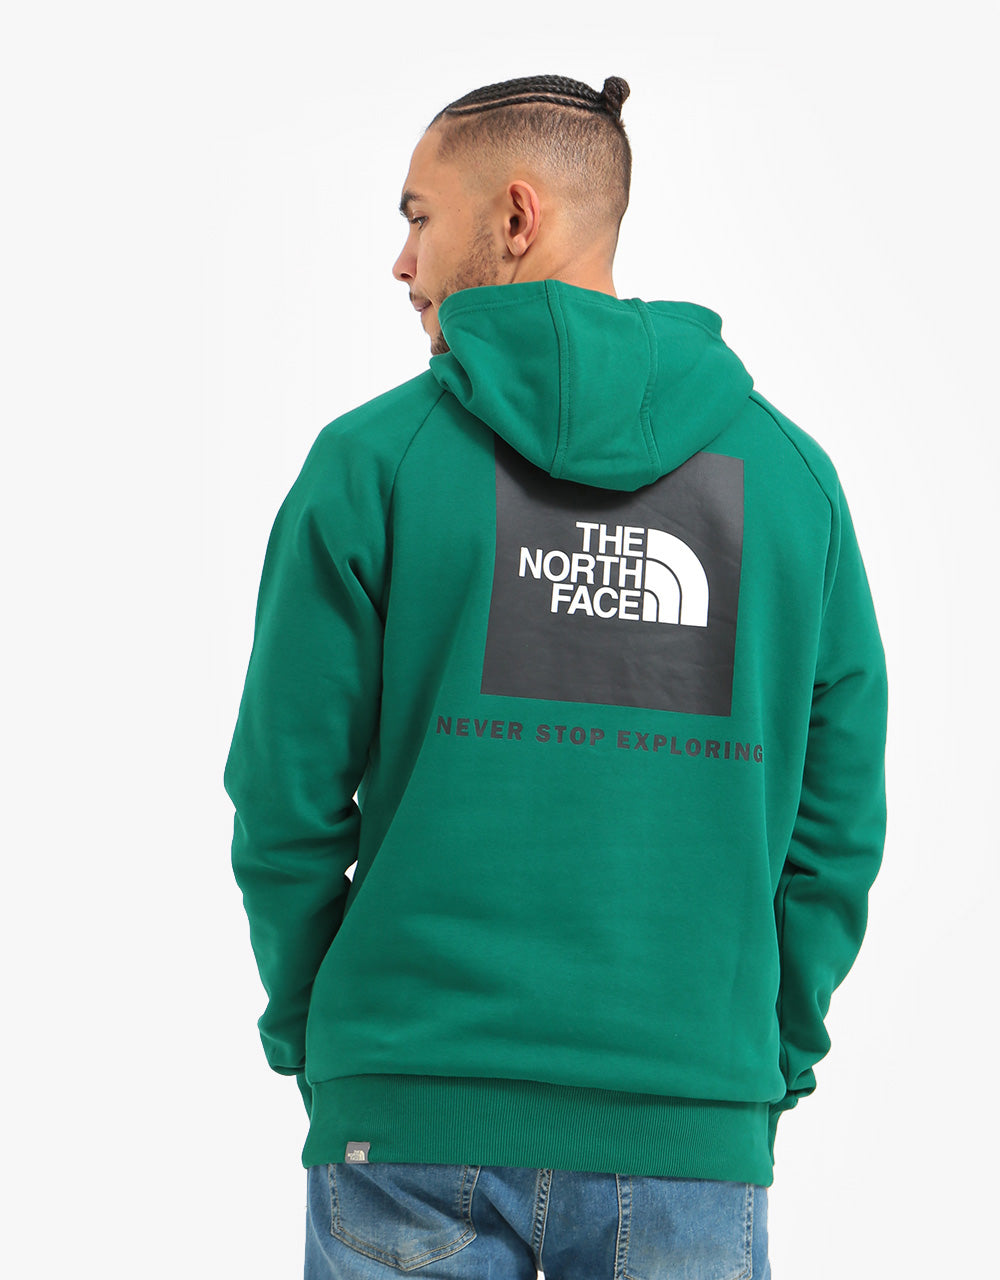 The North Face Raglan Red Box Pullover Hoodie - Evergreen